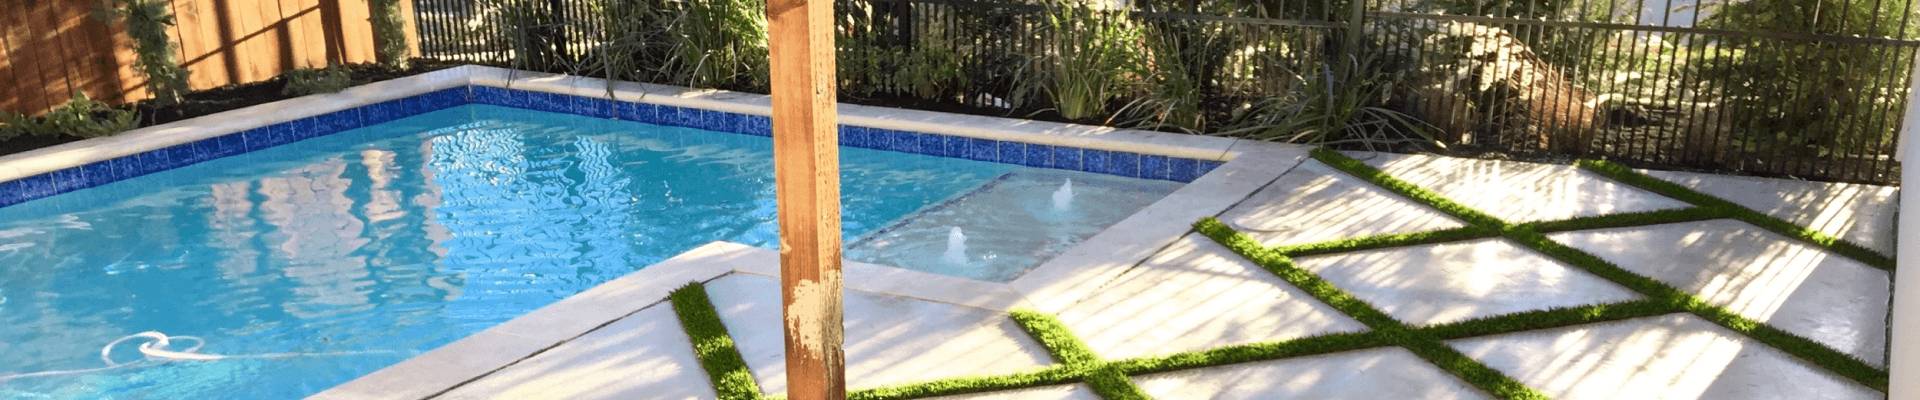 pool with a decking strips in side that use artificial grass.